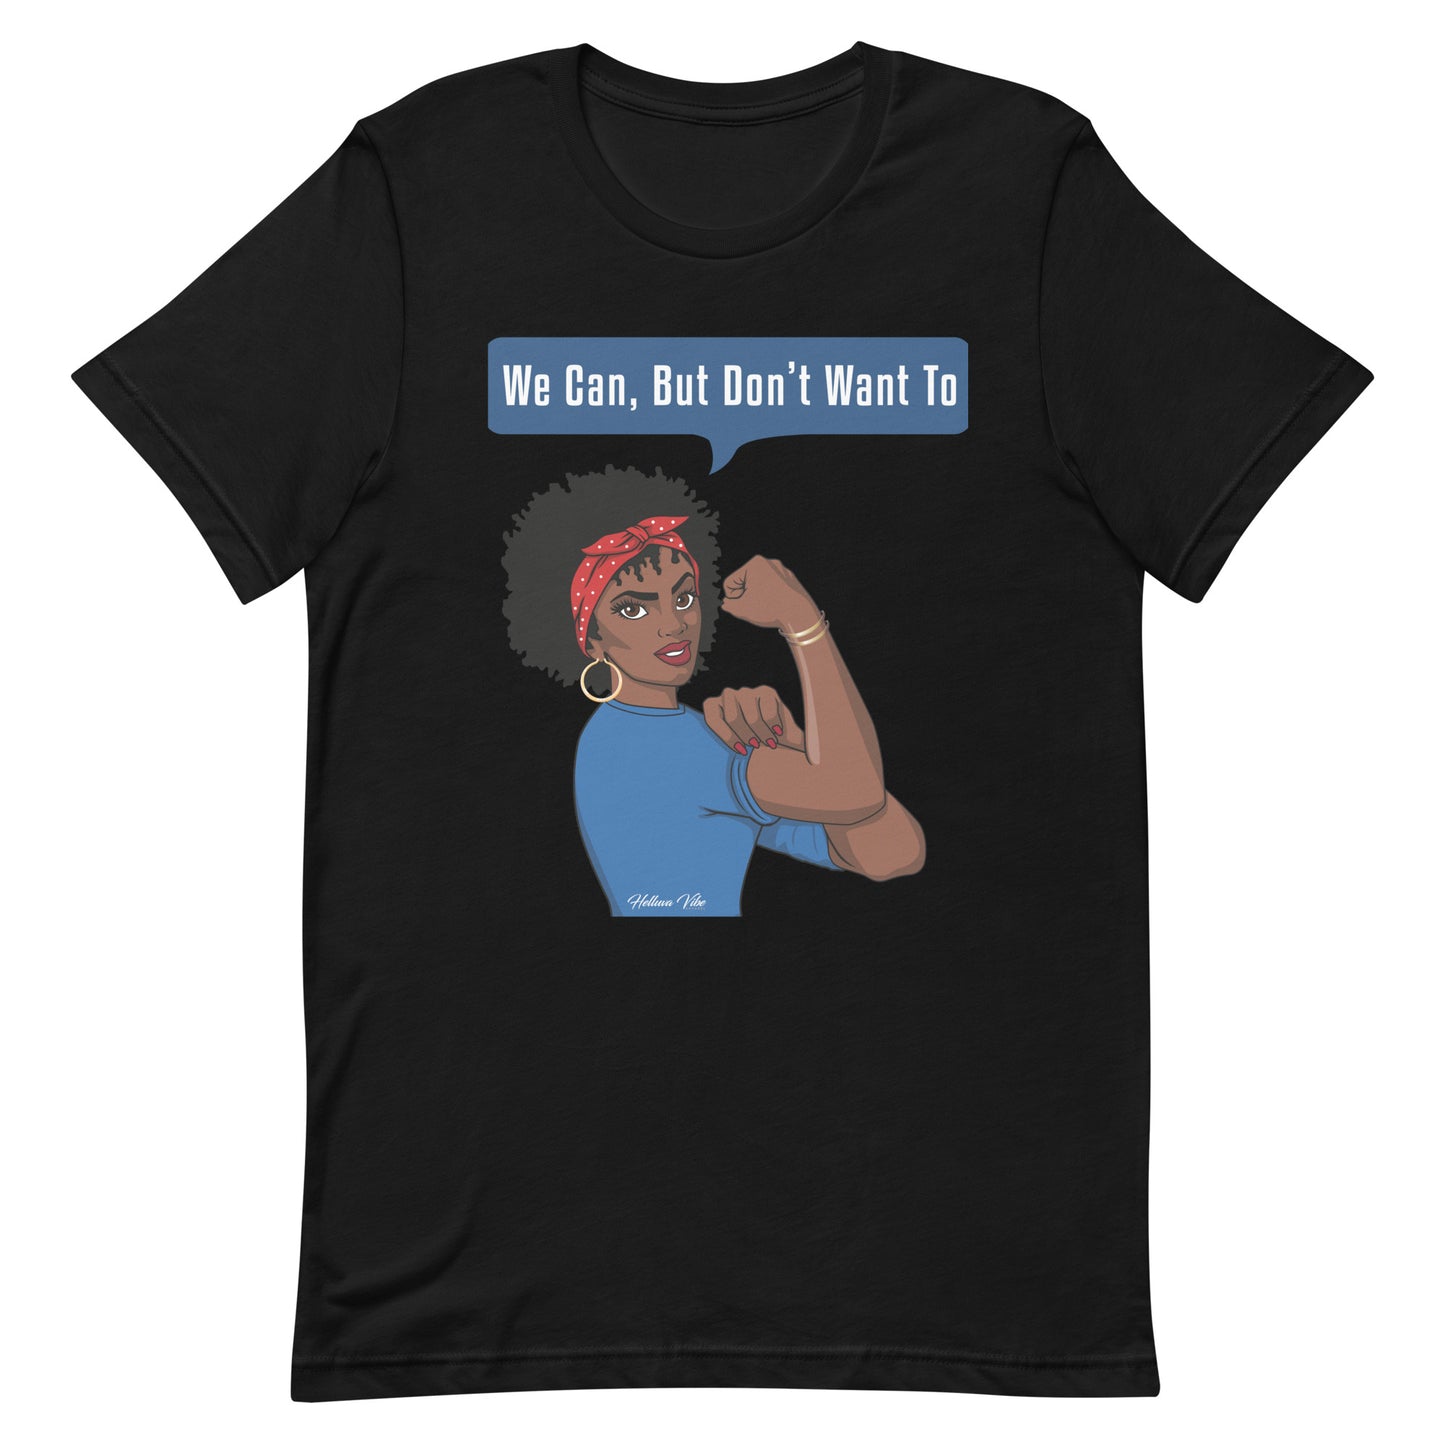 Yes We Can T-shirt